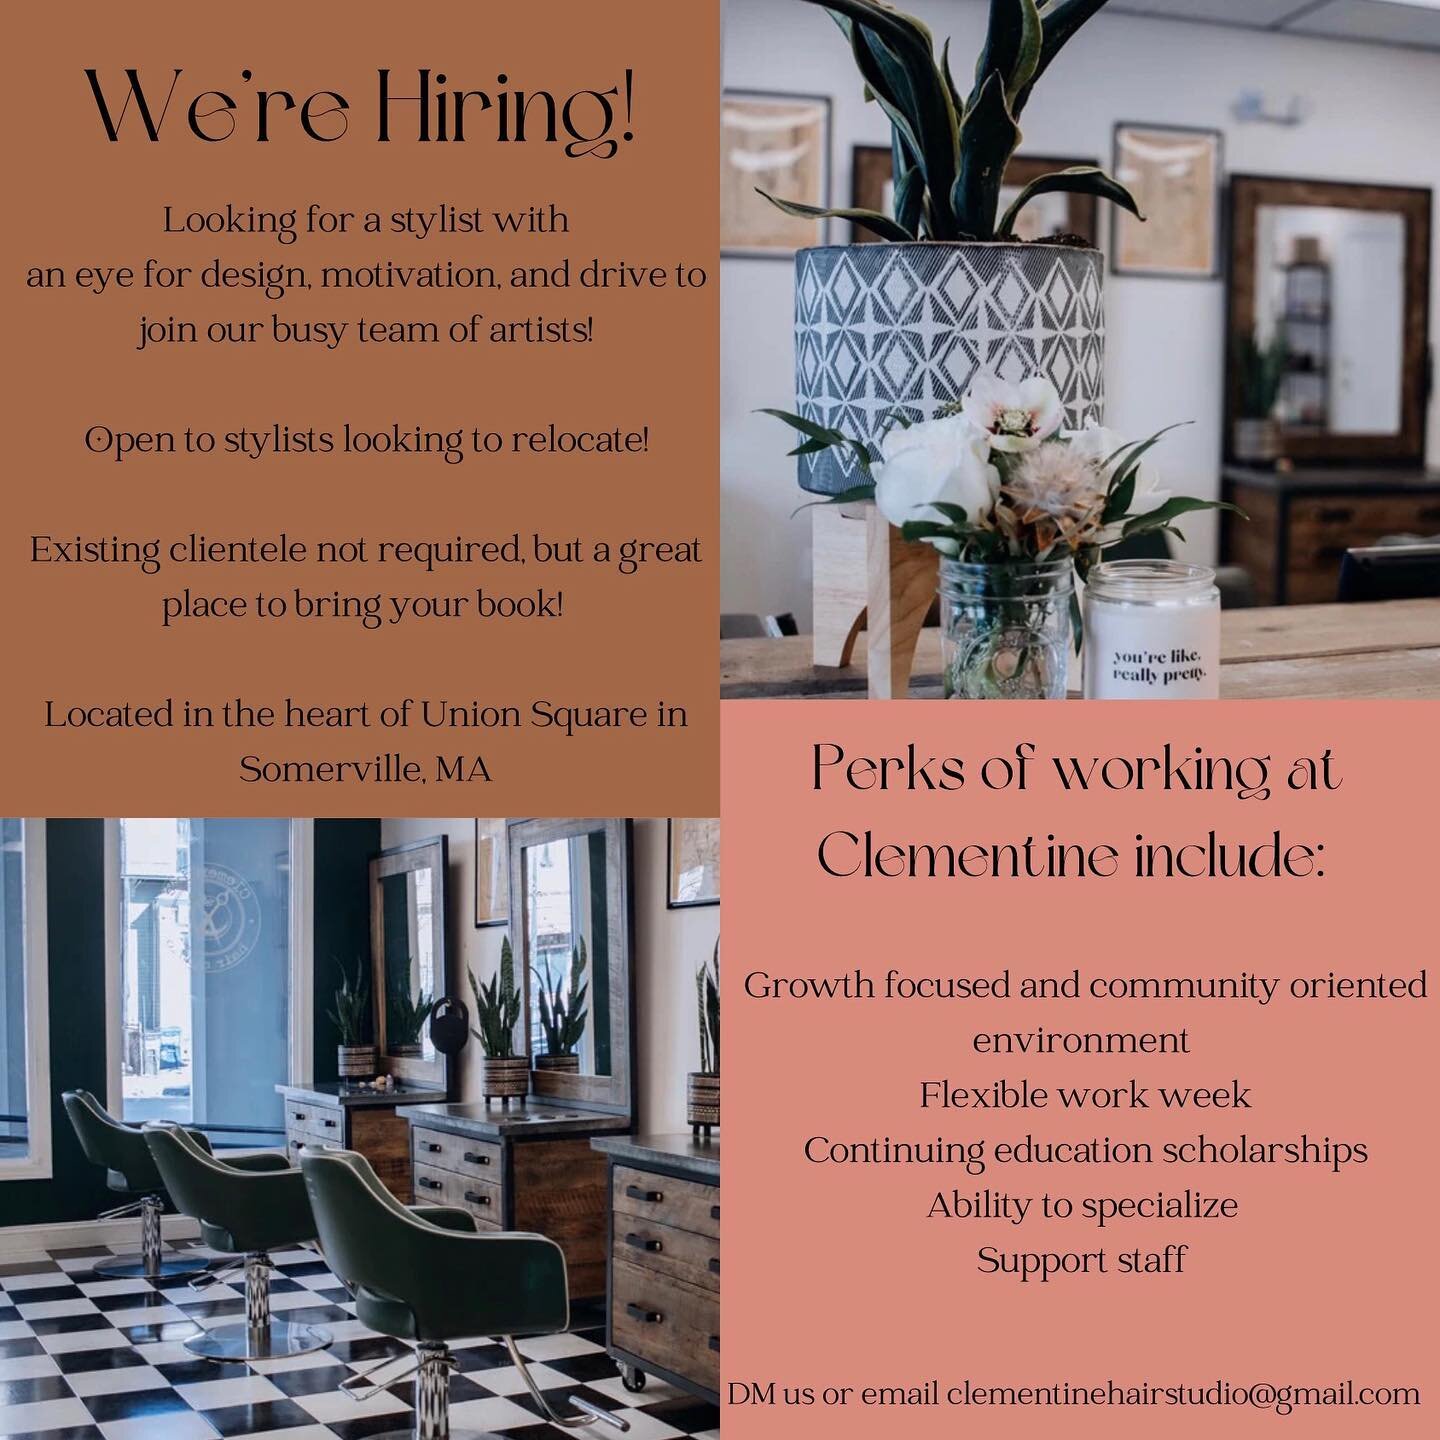 ✨NOW HIRING✨
That&rsquo;s right! We are looking to add to our dream team of stylists! Clementine was born from a need to create space in this industry for a collaborative, supportive, ego-free, and growth focused spot. We&rsquo;d love to welcome a fe